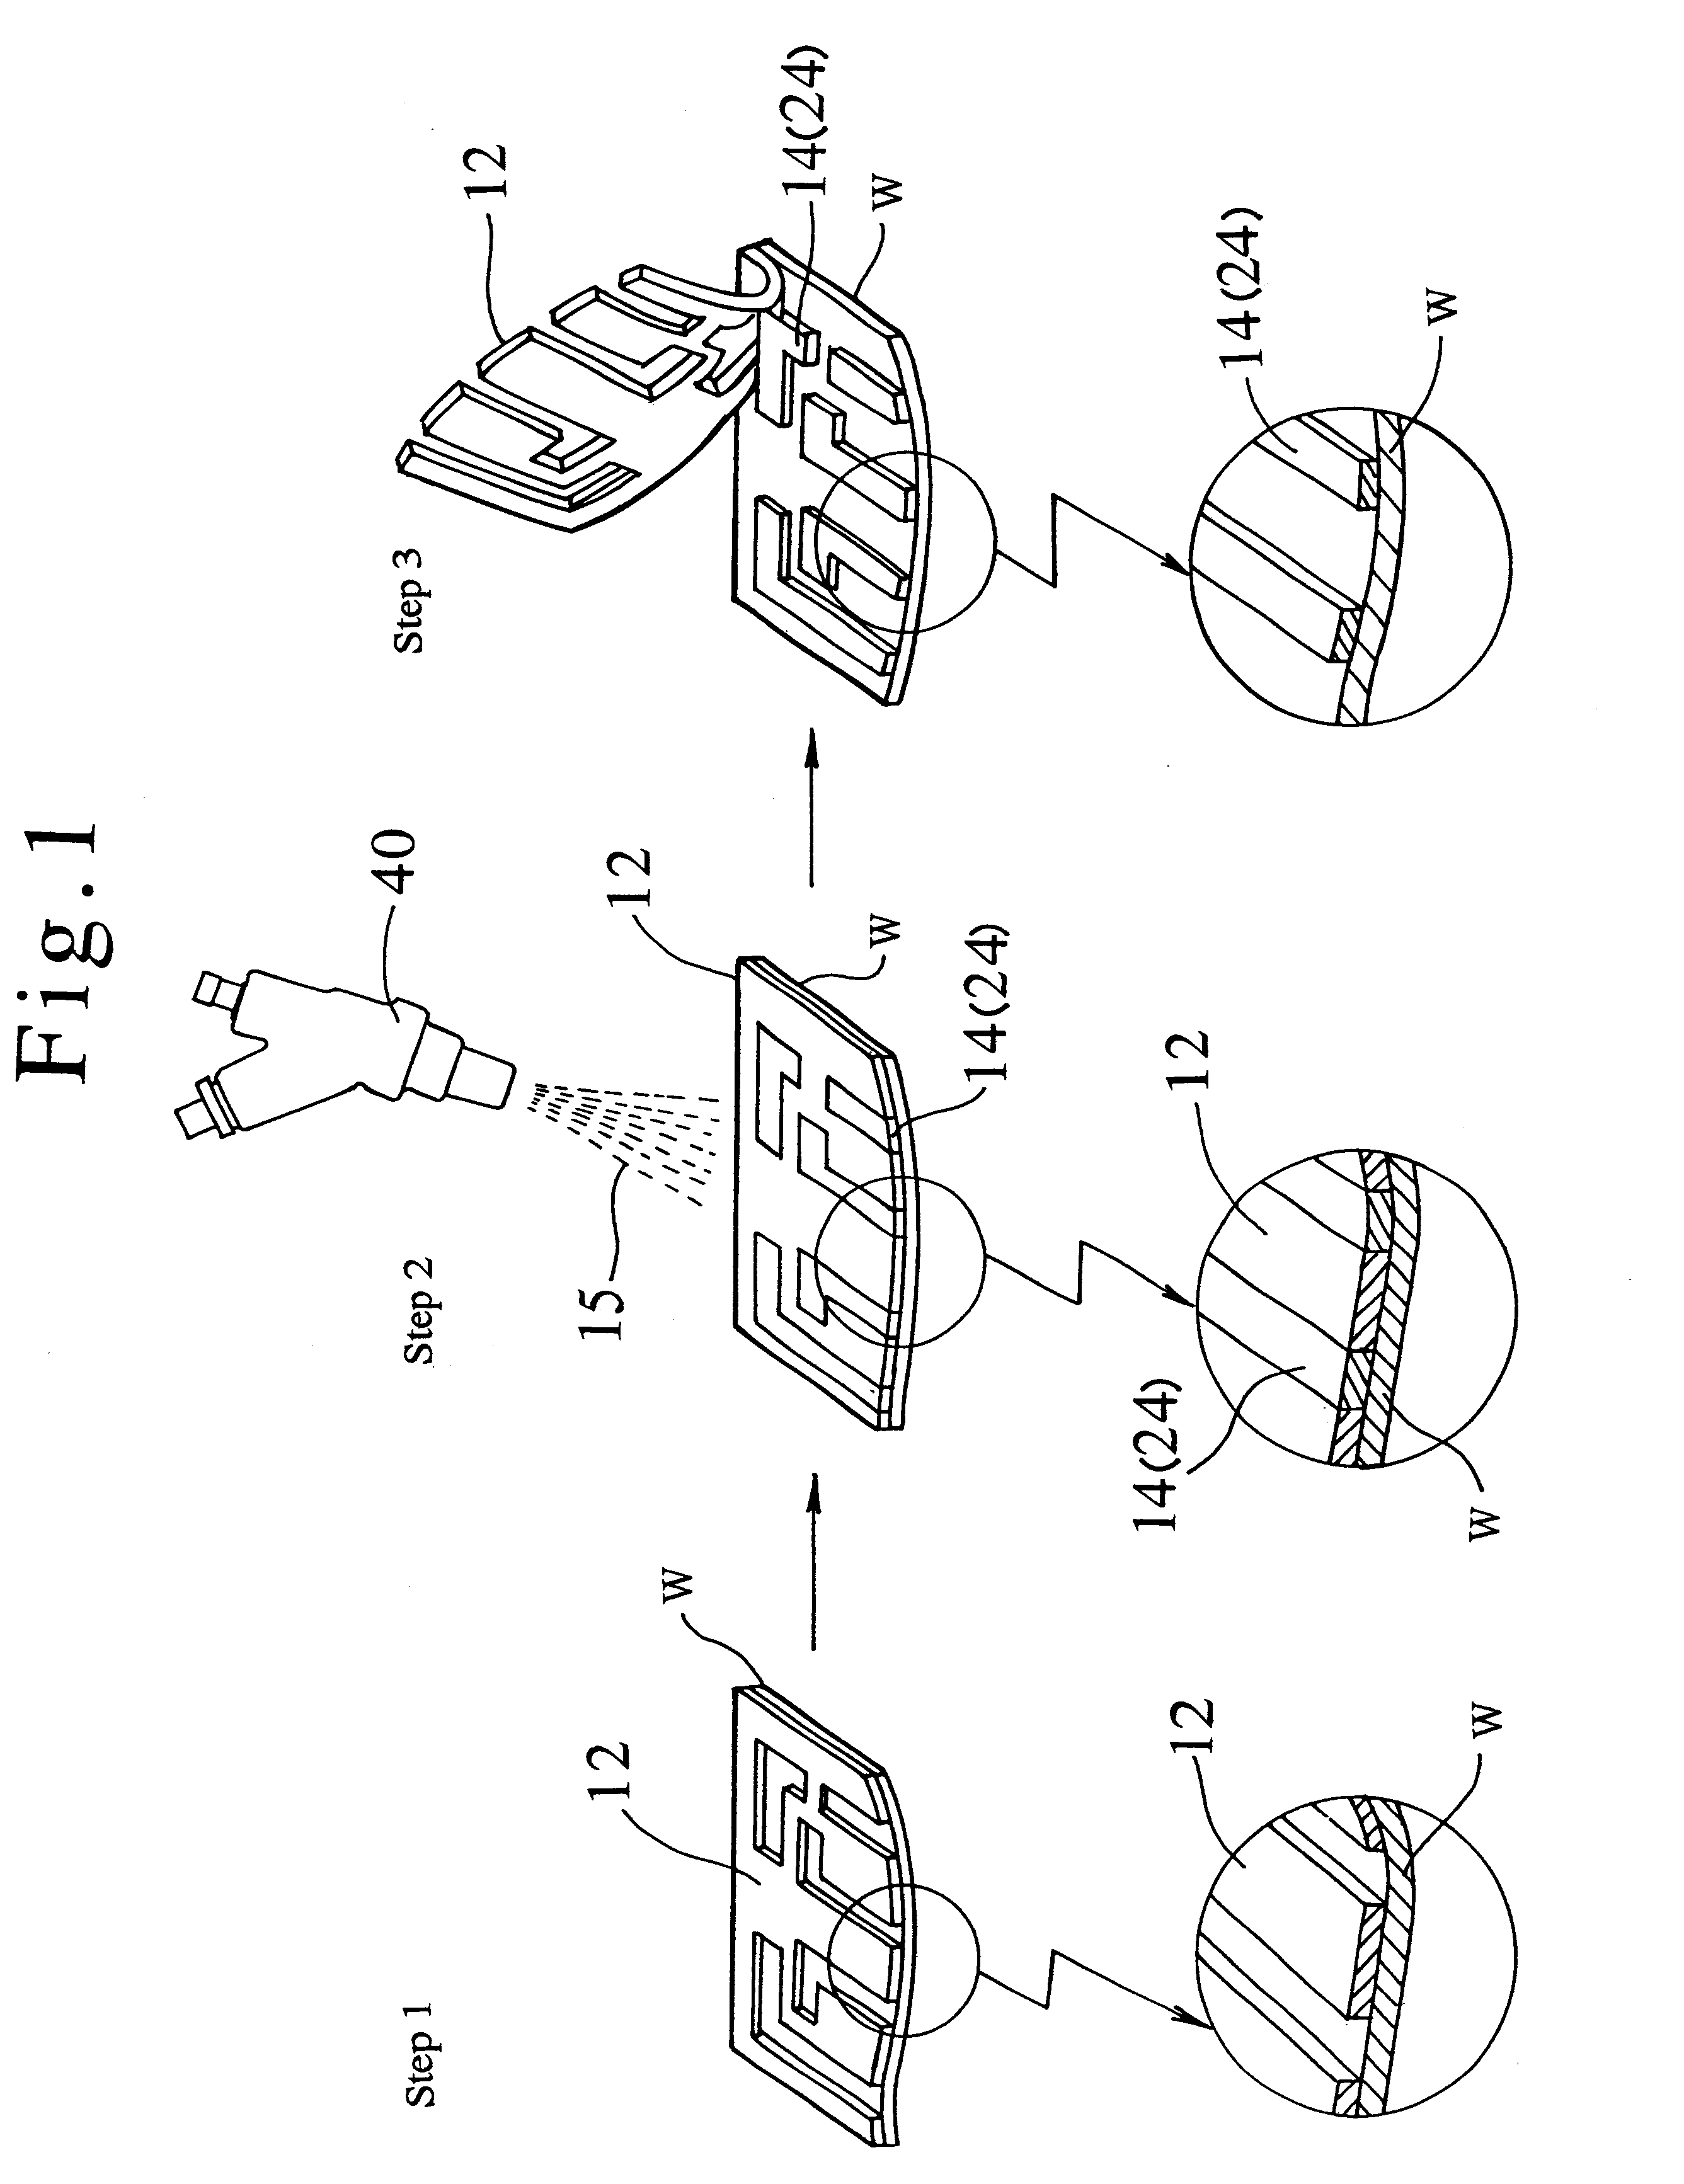 Method for forming a metallic coat by impacting metallic particles on a workpiece